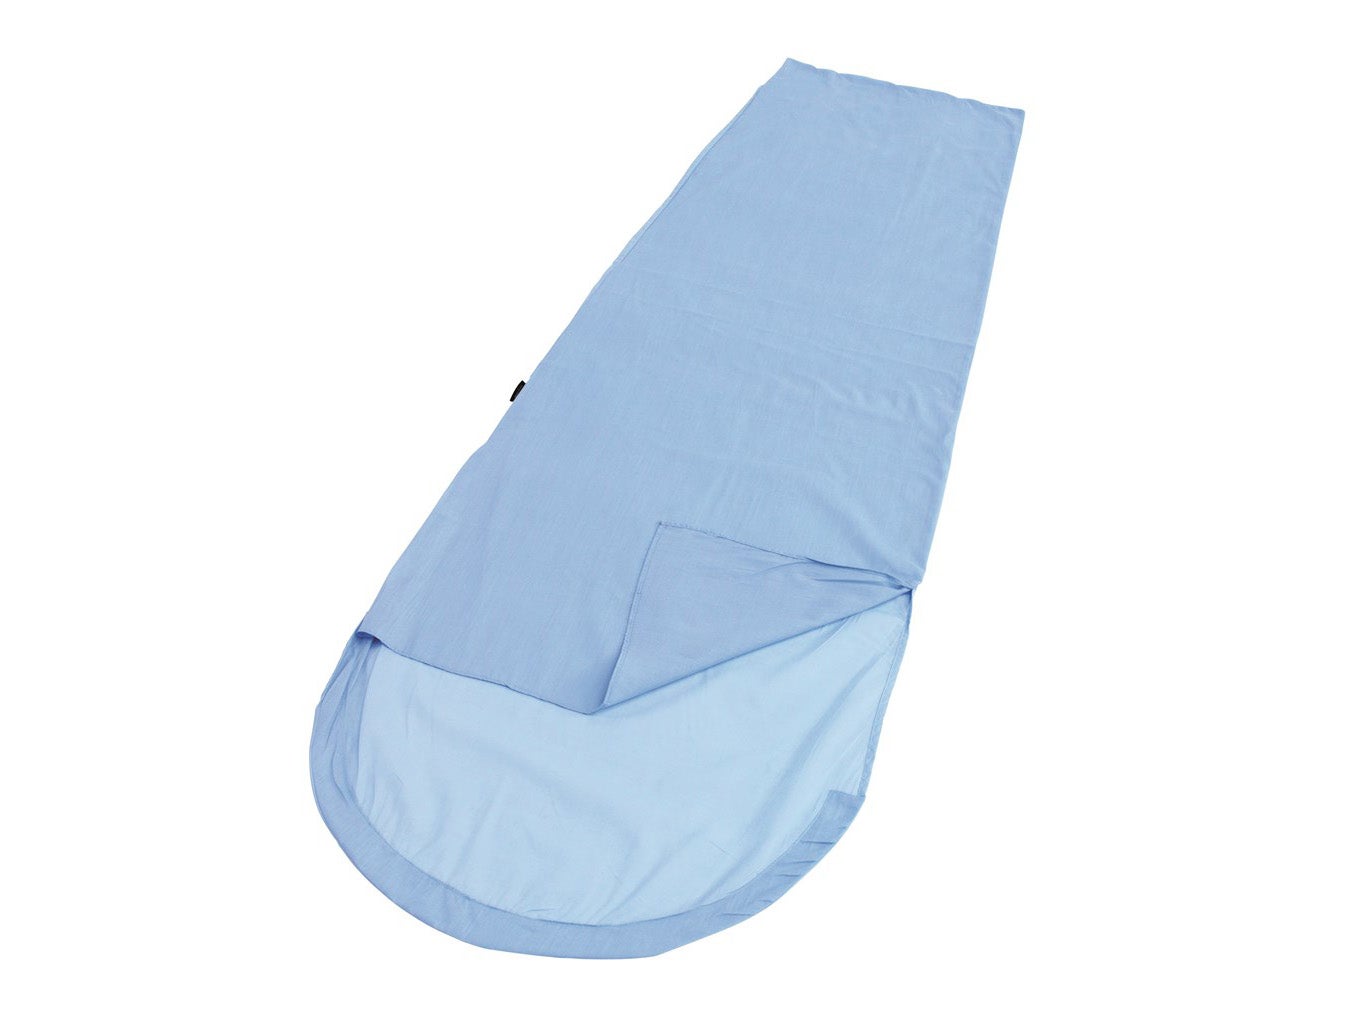 VITAMIN SEA Cotton Sleeping Bag Liner Ultralight | Camping Sheets  Lightweight | Travel Sheet | Sleep Sack Adult | Travel Sheet Liners for  Hotel | Double Light Blue Gray Double Two Person Queen Size